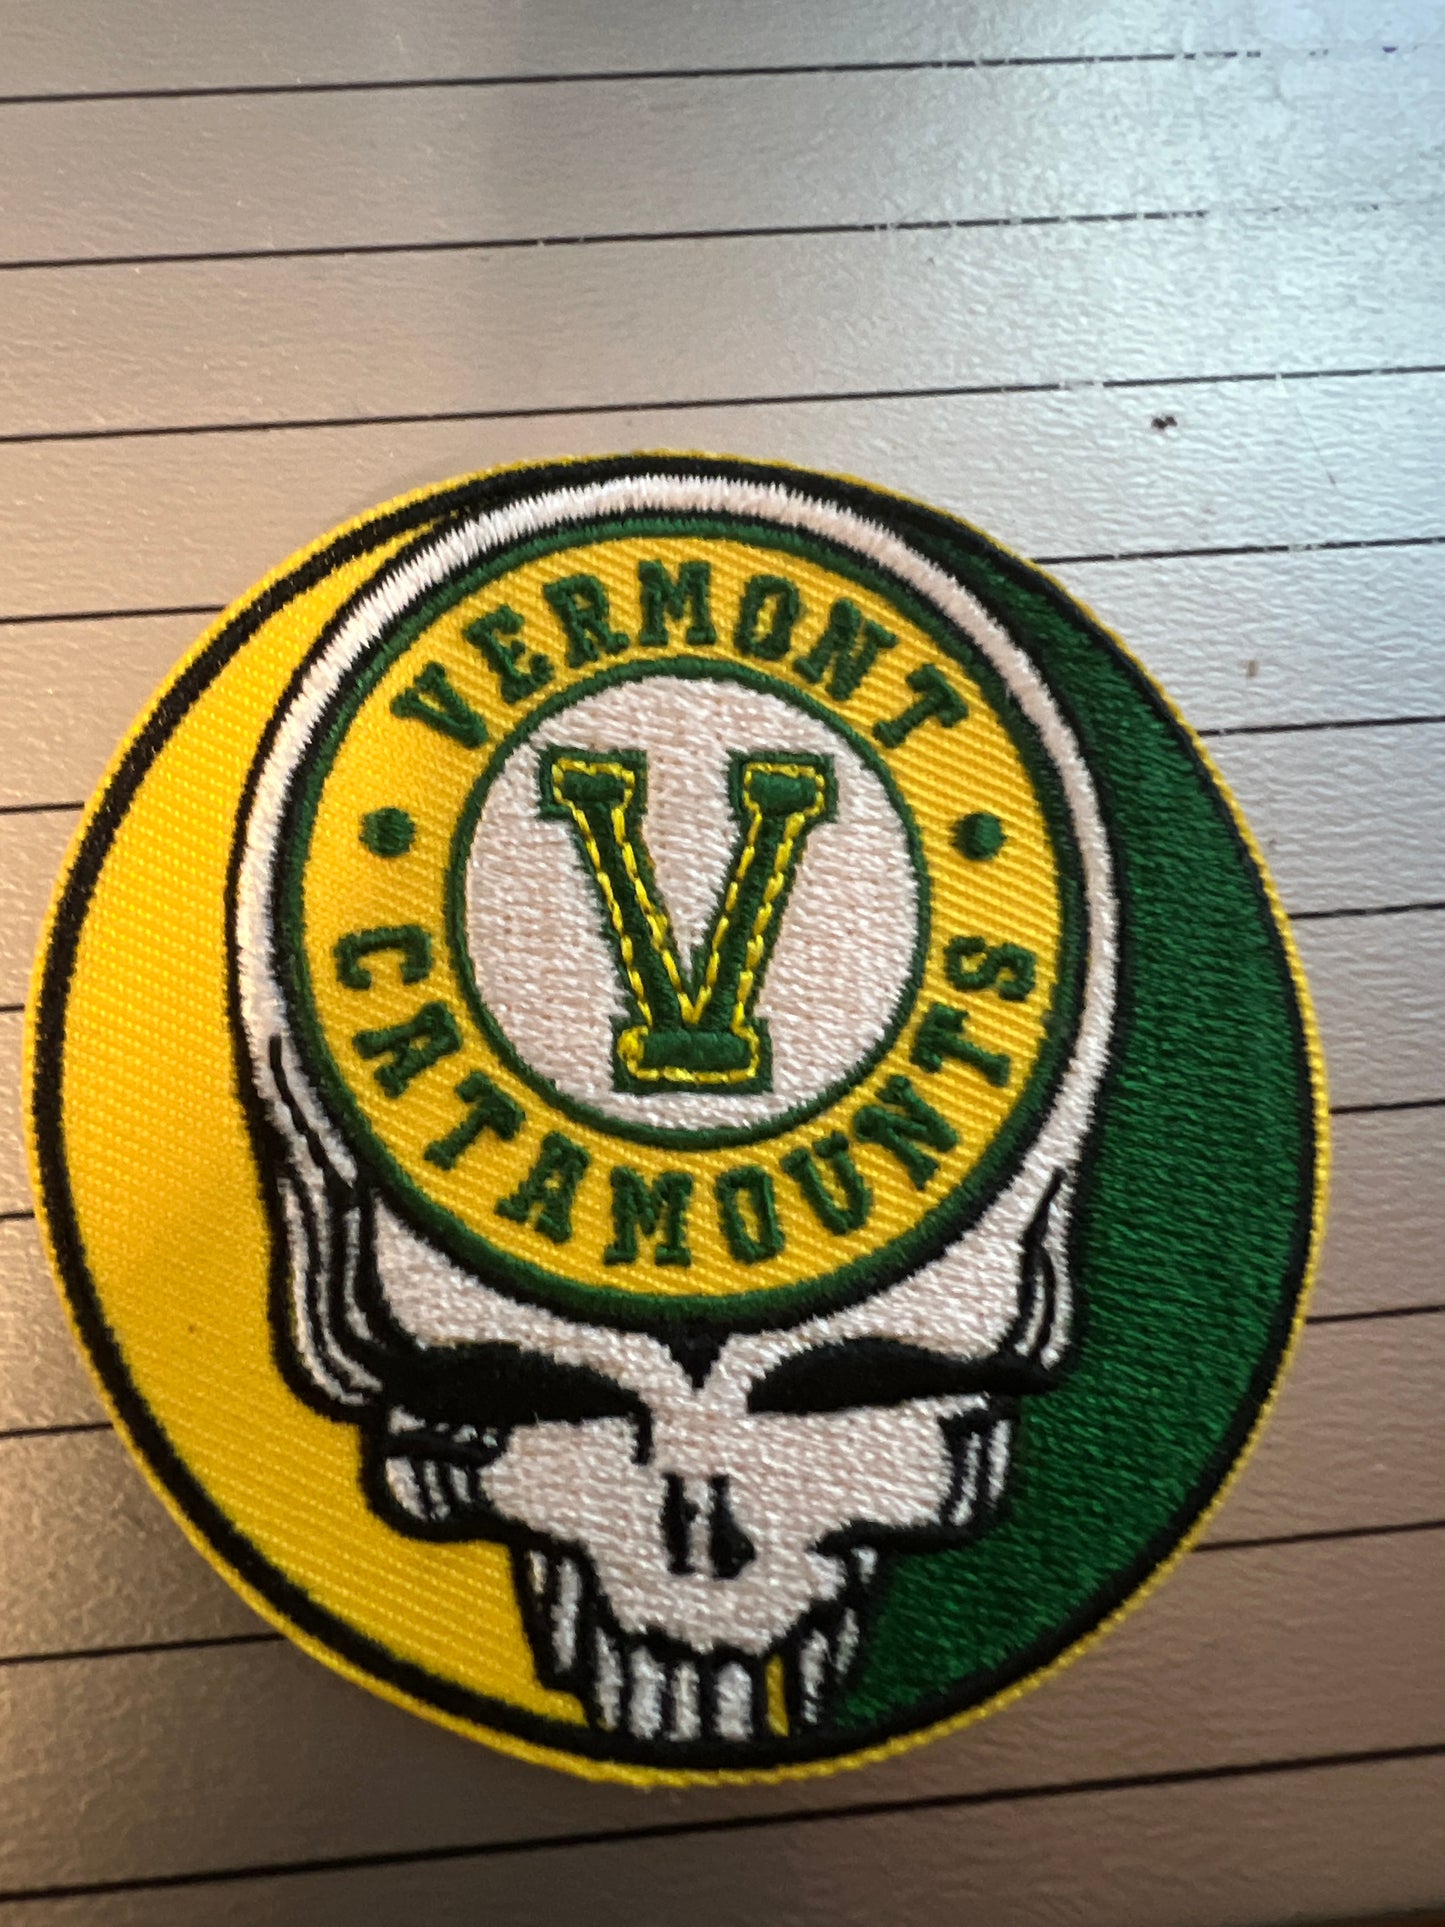 Vermont Catamounts SYF heat applied patches. Very High end